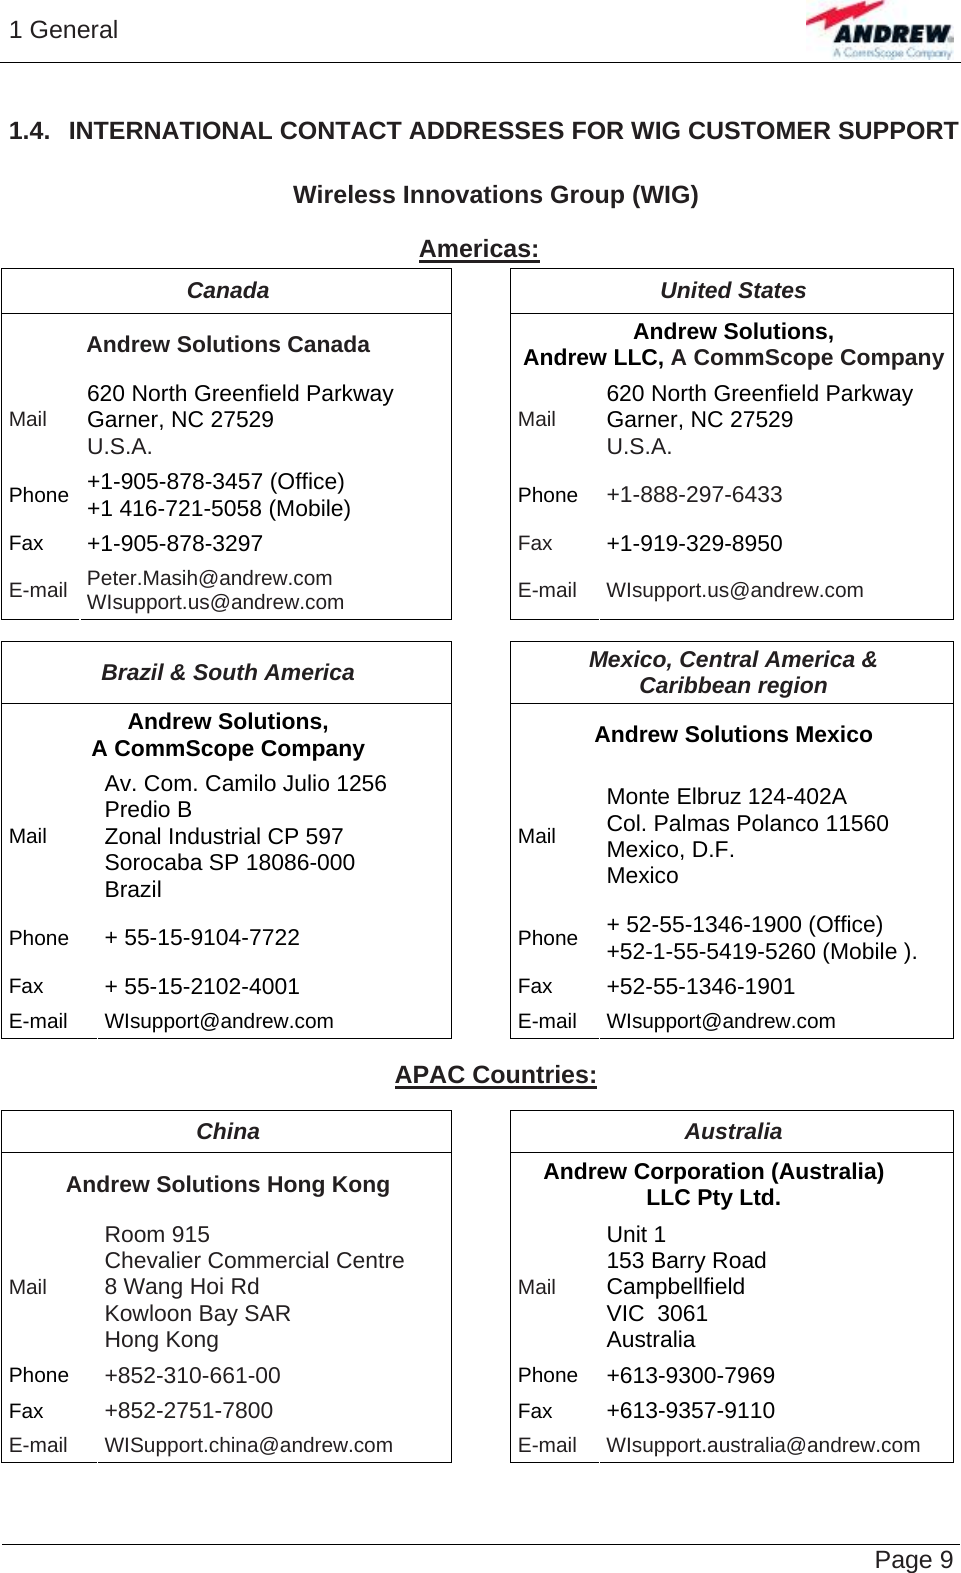 1 General   Page 9 1.4.  INTERNATIONAL CONTACT ADDRESSES FOR WIG CUSTOMER SUPPORT  Wireless Innovations Group (WIG)  Americas: Canada United States Andrew Solutions Canada  Andrew Solutions,  Andrew LLC, A CommScope CompanyMail 620 North Greenfield Parkway Garner, NC 27529 U.S.A. Mail  620 North Greenfield Parkway Garner, NC 27529 U.S.A. Phone +1-905-878-3457 (Office) +1 416-721-5058 (Mobile) Phone +1-888-297-6433 Fax +1-905-878-3297  Fax  +1-919-329-8950 E-mail Peter.Masih@andrew.com WIsupport.us@andrew.com  E-mail WIsupport.us@andrew.com  Brazil &amp; South America  Mexico, Central America &amp;  Caribbean region Andrew Solutions,  A CommScope Company  Andrew Solutions Mexico Mail Av. Com. Camilo Julio 1256 Predio B Zonal Industrial CP 597 Sorocaba SP 18086-000 Brazil Mail Monte Elbruz 124-402A Col. Palmas Polanco 11560 Mexico, D.F. Mexico Phone  + 55-15-9104-7722  Phone  + 52-55-1346-1900 (Office) +52-1-55-5419-5260 (Mobile ). Fax  + 55-15-2102-4001  Fax  +52-55-1346-1901 E-mail WIsupport@andrew.com  E-mail WIsupport@andrew.com  APAC Countries:  China Australia Andrew Solutions Hong Kong  Andrew Corporation (Australia) LLC Pty Ltd. Mail Room 915  Chevalier Commercial Centre 8 Wang Hoi Rd Kowloon Bay SAR Hong Kong Mail Unit 1 153 Barry Road Campbellfield  VIC  3061 Australia Phone +852-310-661-00  Phone +613-9300-7969 Fax +852-2751-7800  Fax +613-9357-9110 E-mail WISupport.china@andrew.com  E-mail WIsupport.australia@andrew.com 